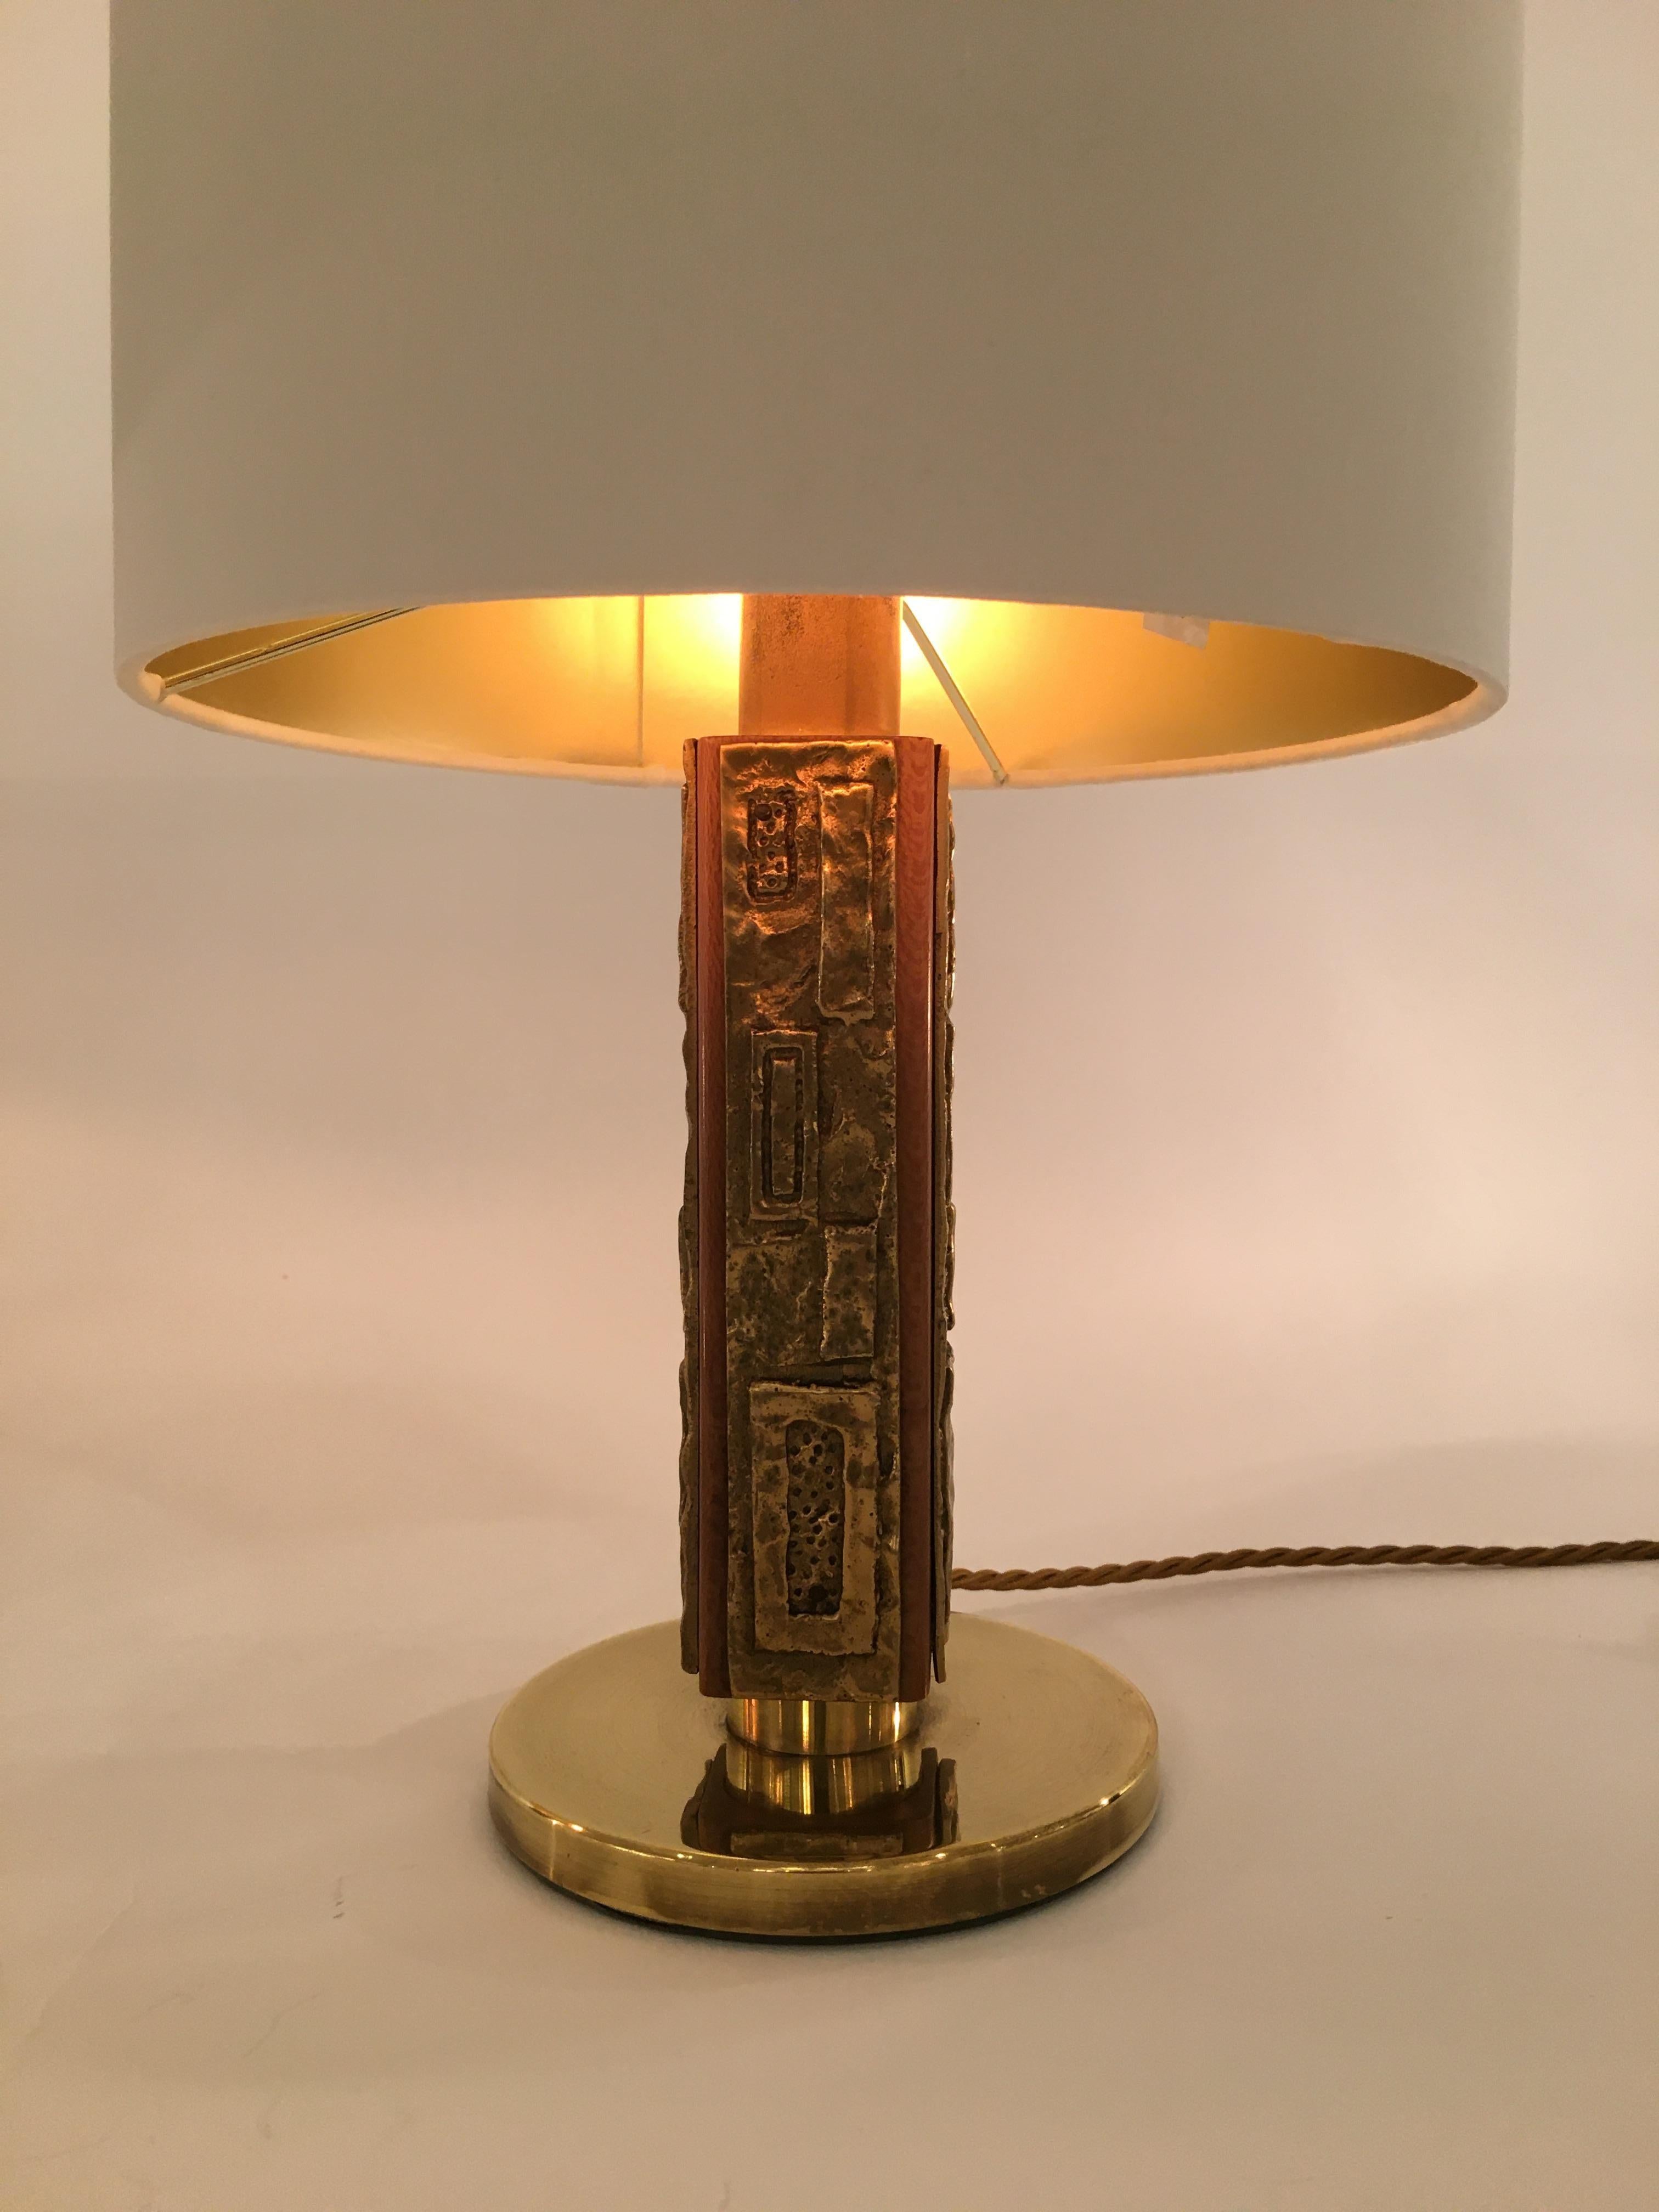 A fabulous pair of 1970s bronze, brass and walnut table lamps designed by Angelo Brotto for the Italian company, Esperia, circa 1970. The principal body of the 'Margot' lamp is formed from a rectangular cylinder with rounded edges and is made of